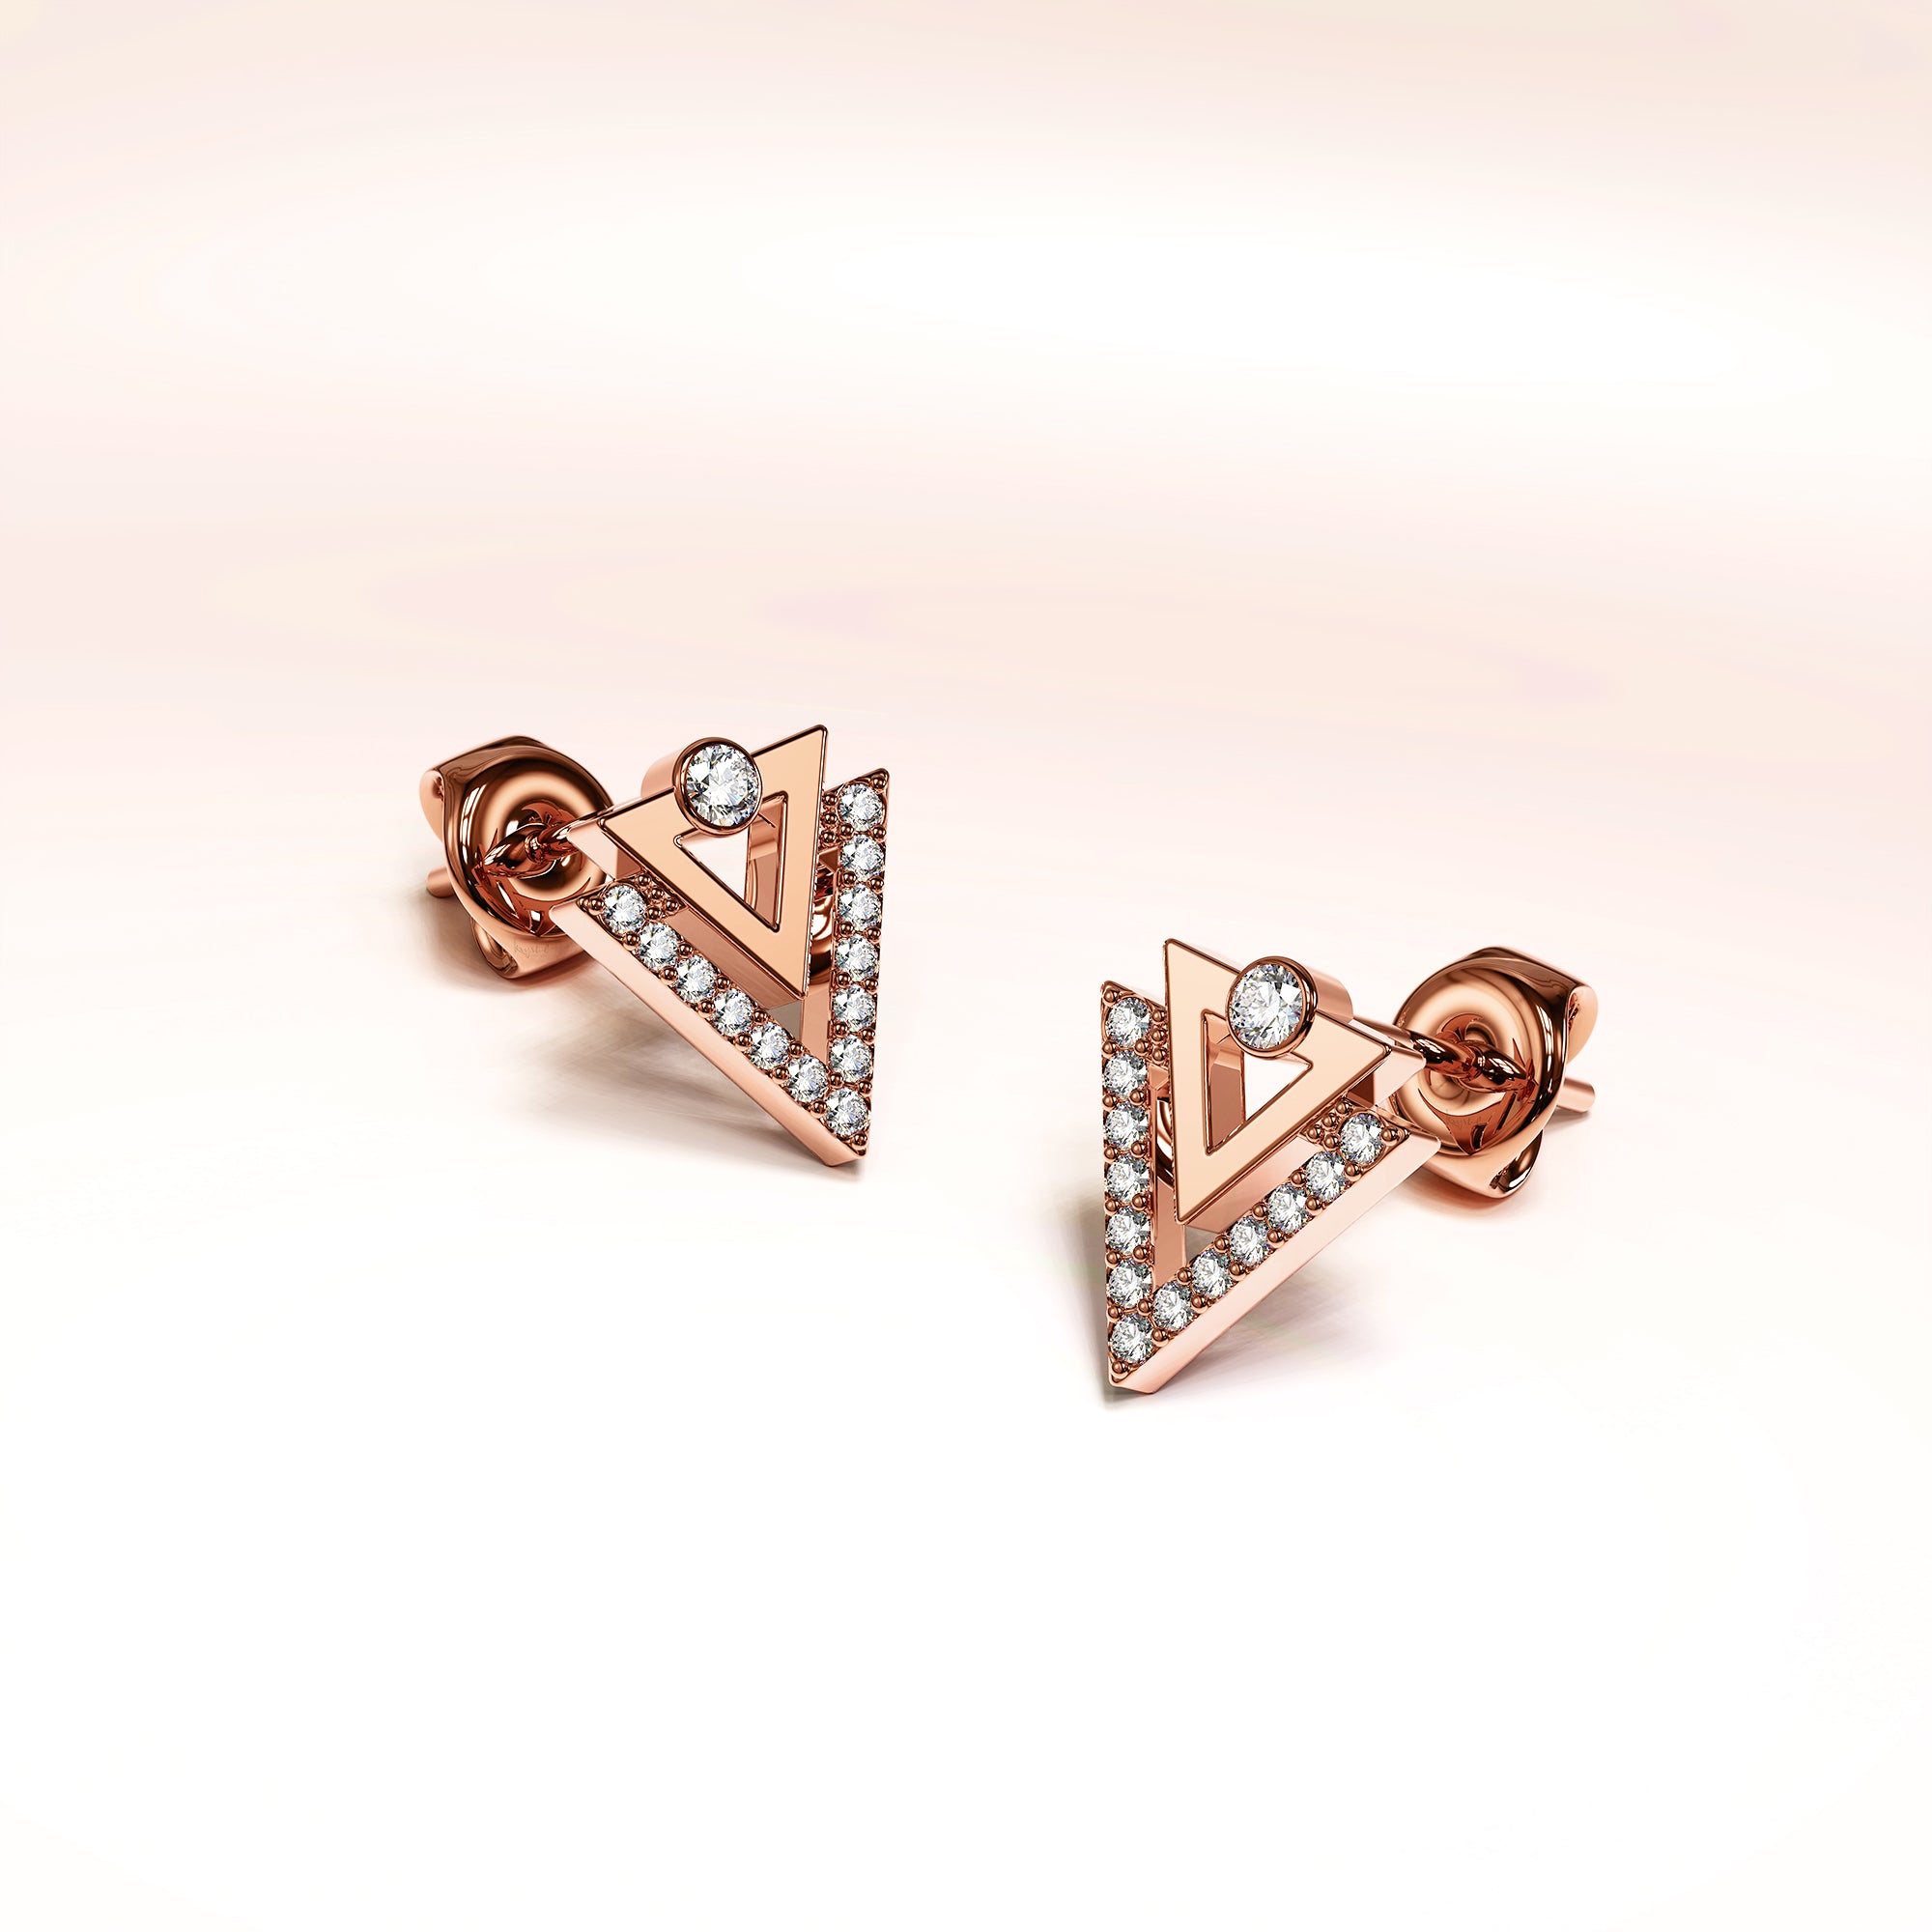 Trilateral Stud Earrings Embellished with Crystals from SWAROVSKI® in Rose Gold